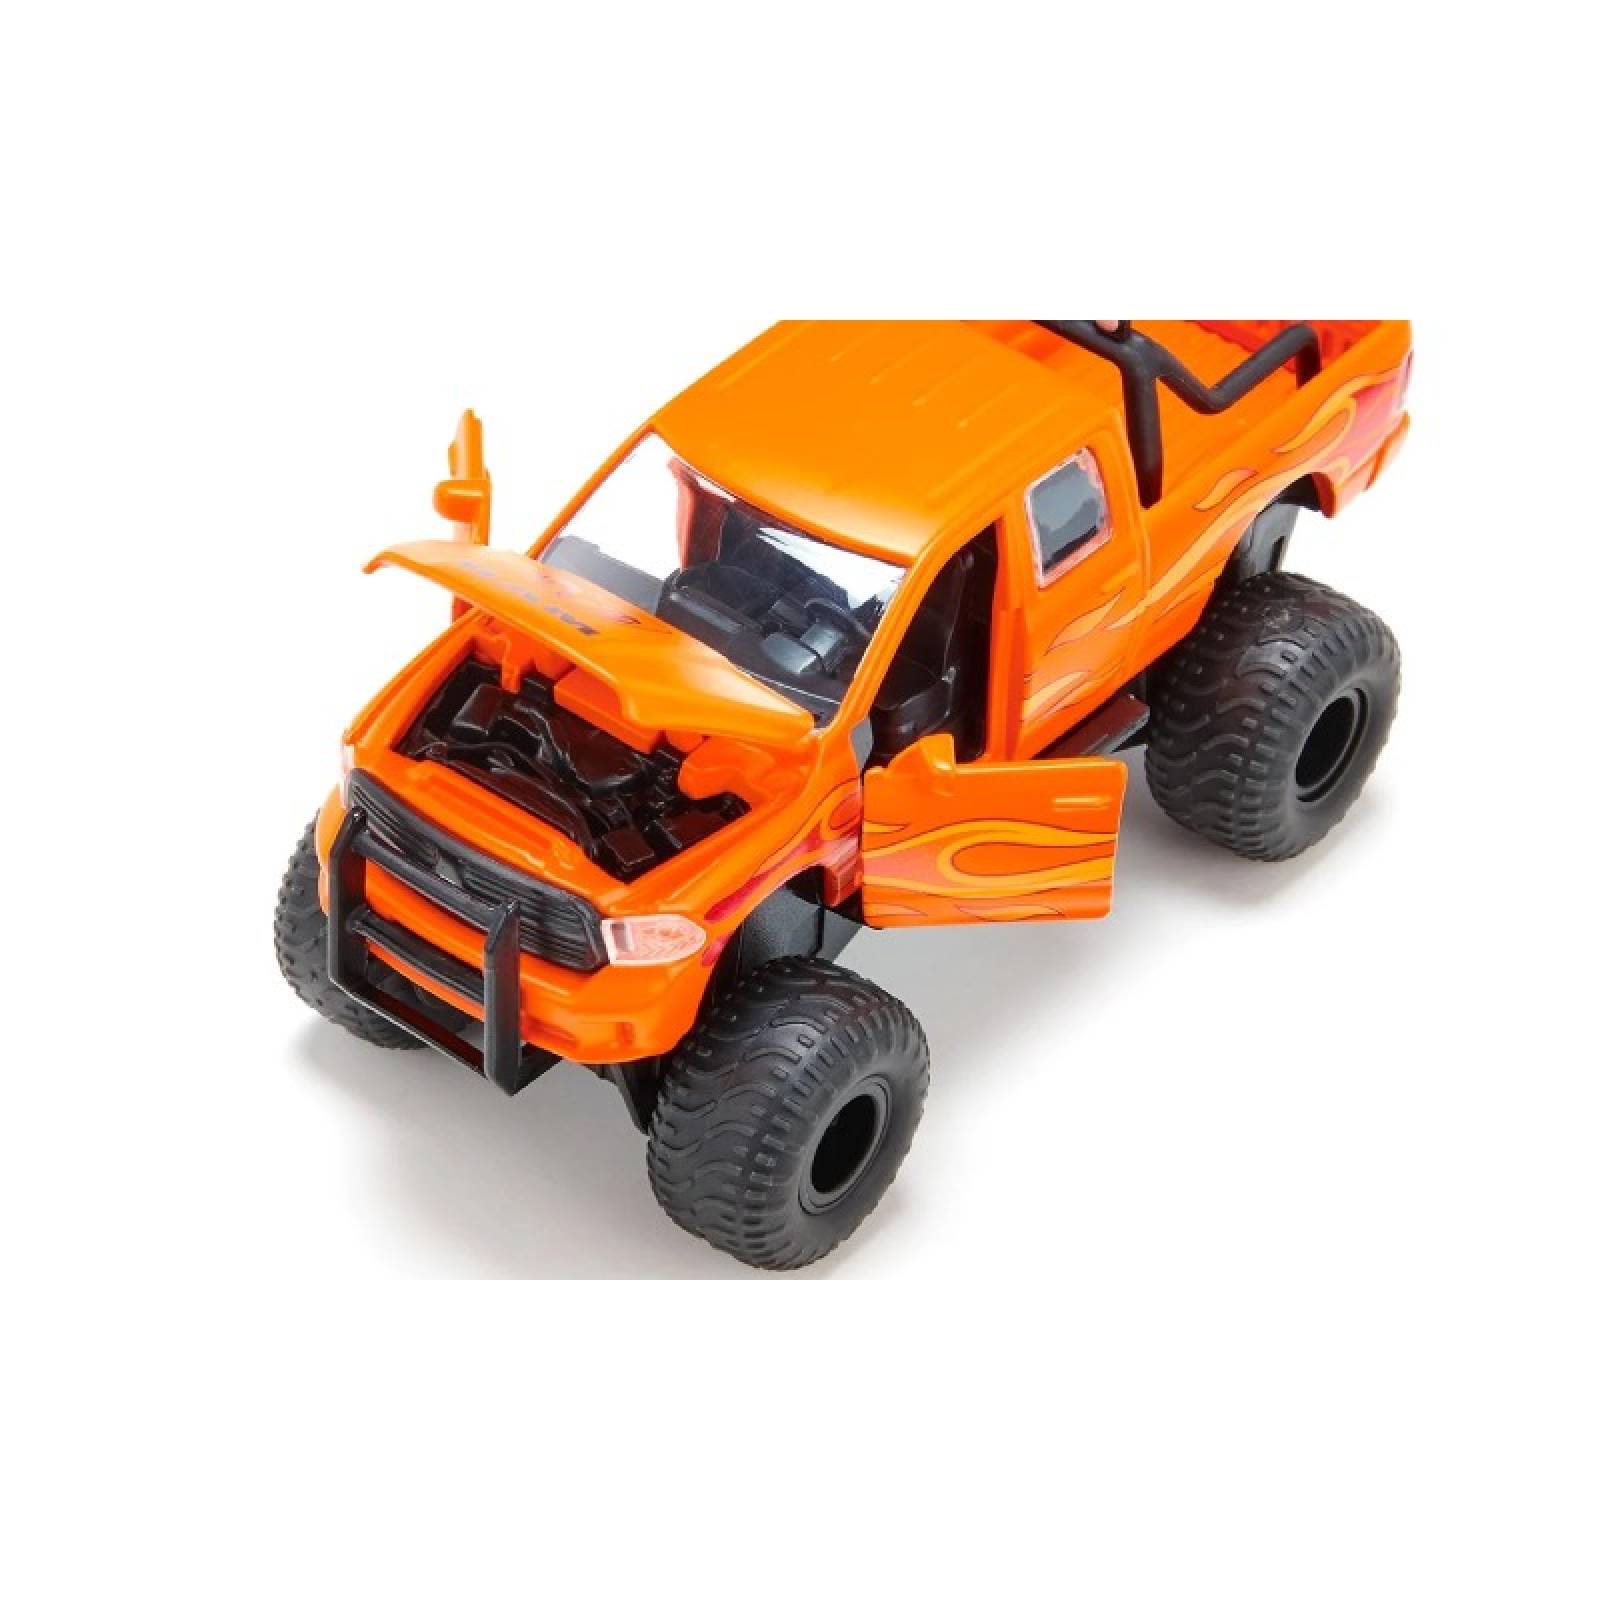 RAM1500 Truck With Balloon Tyres - Die-Cast Toy Vehicle 3+ thumbnails